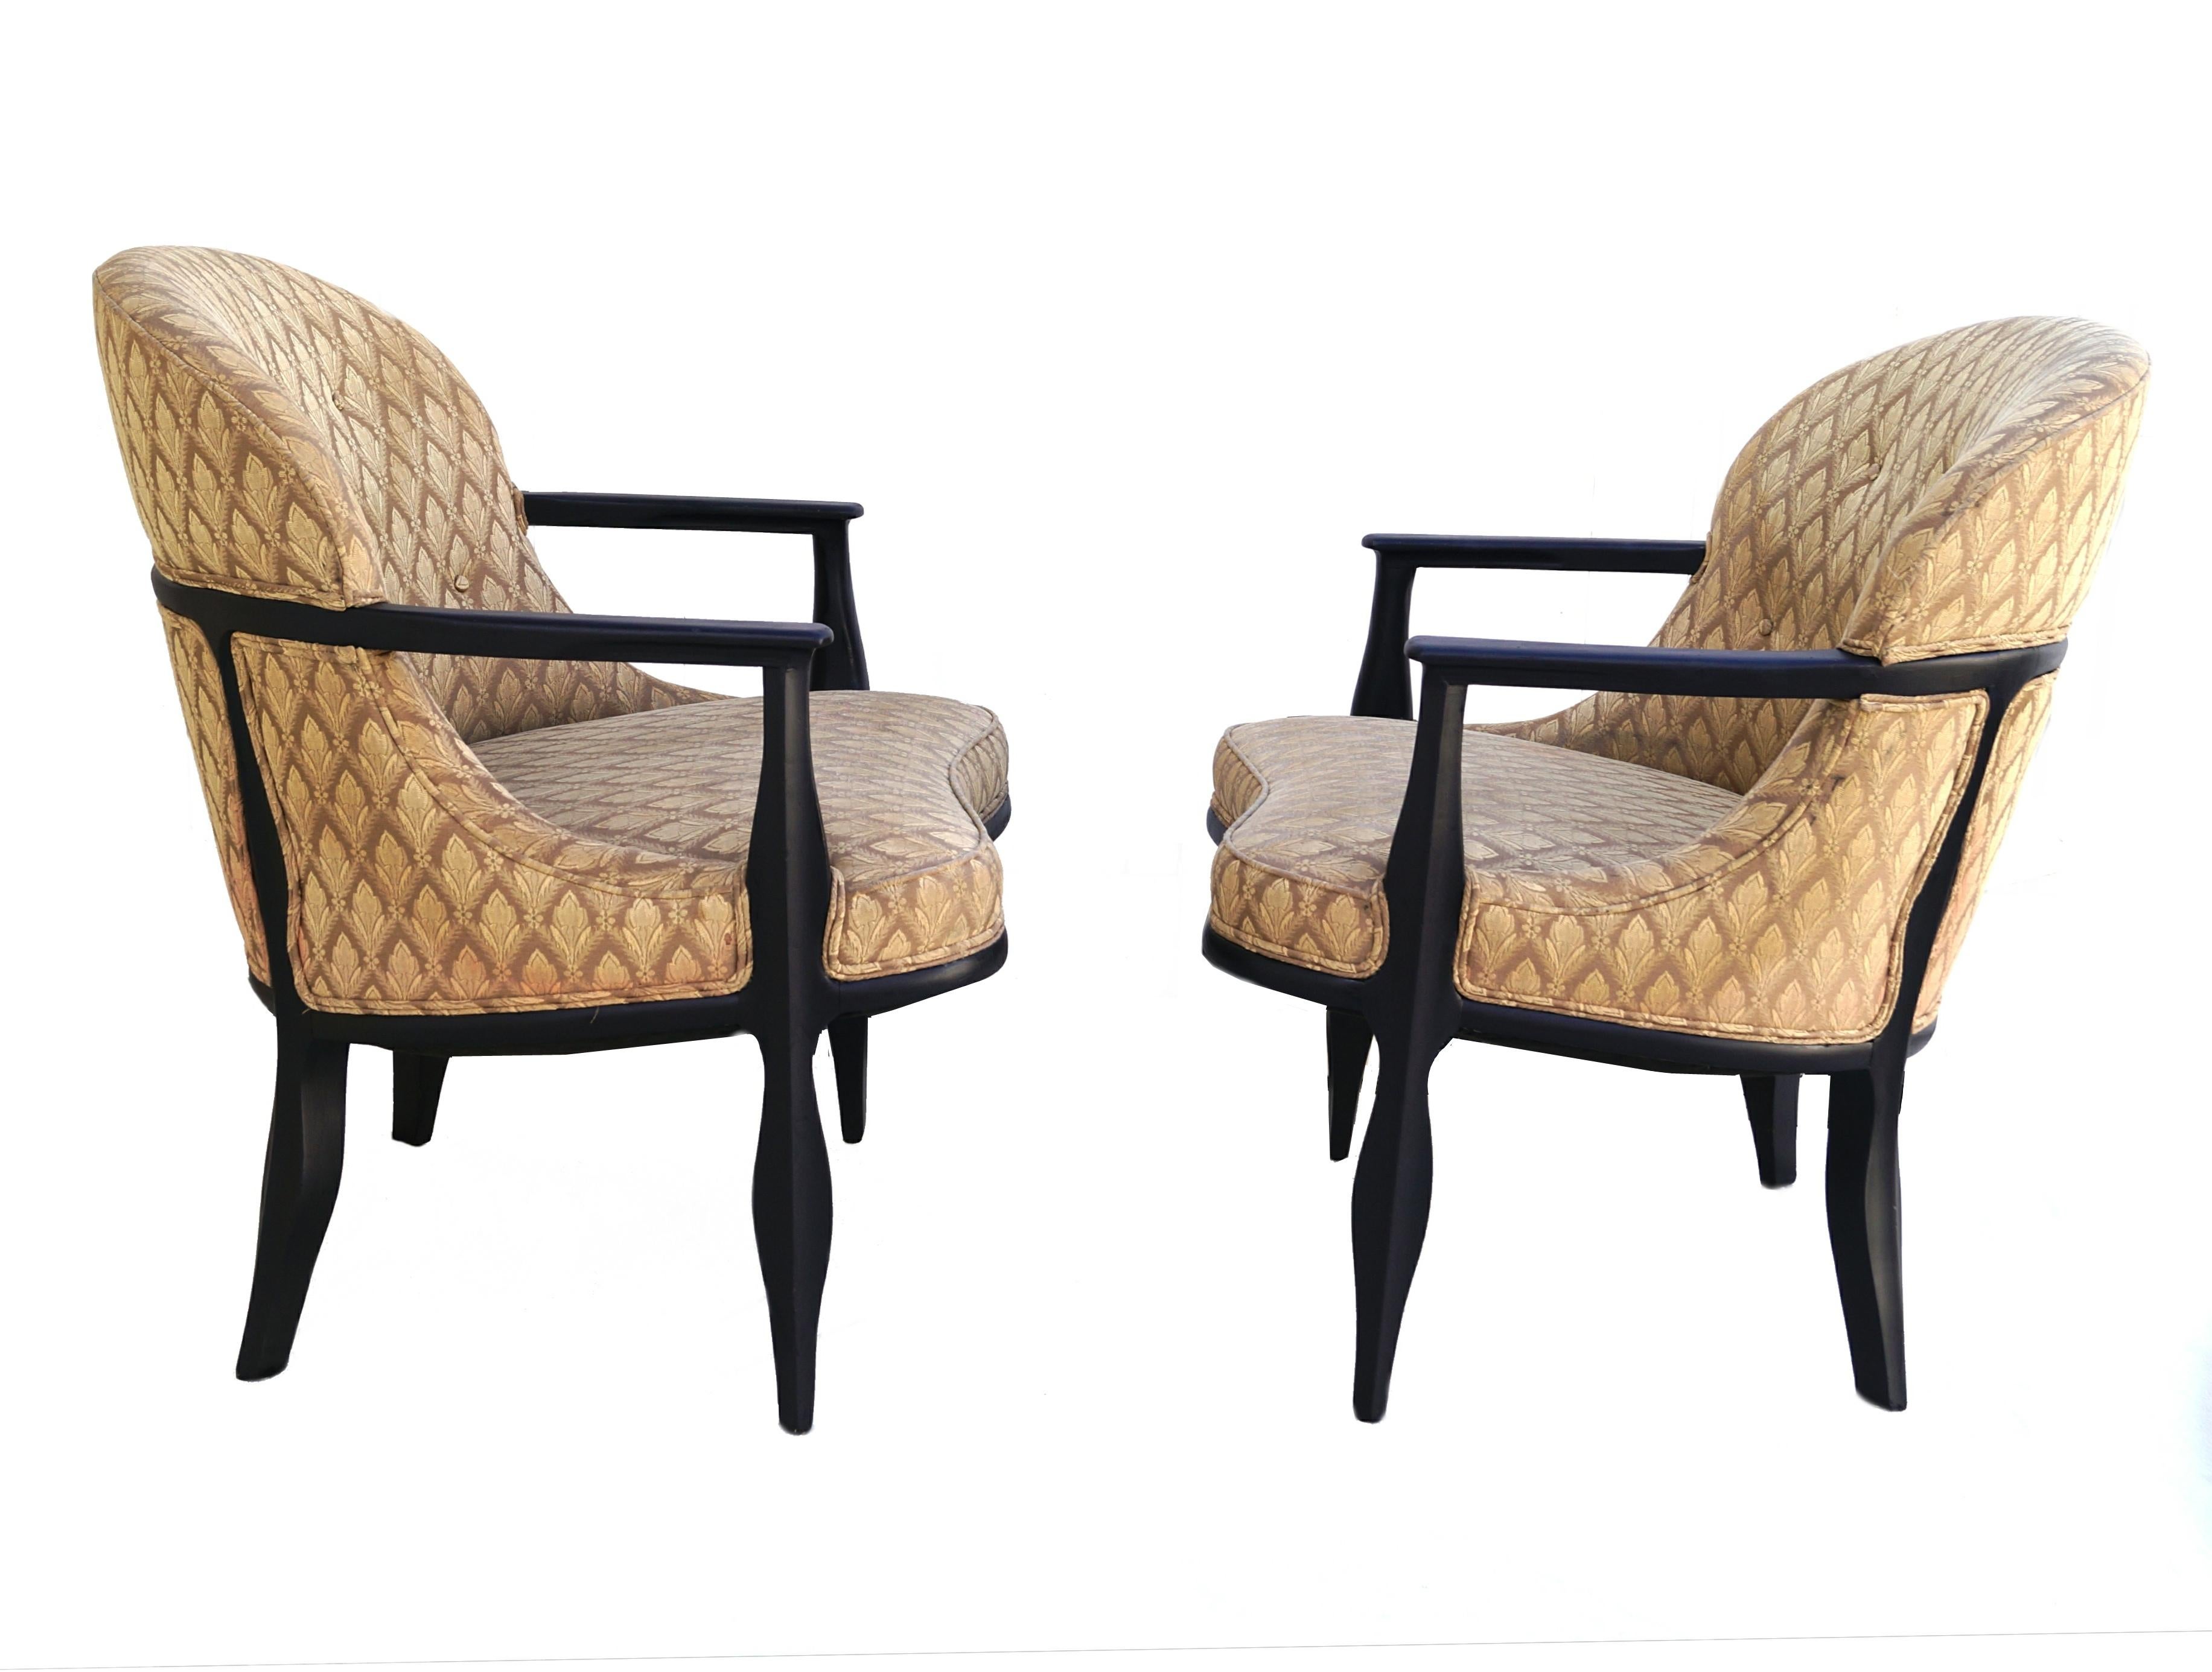 Woodwork Pair of Edward J. Wormley Janus Lounge Chairs for Dunbar For Sale